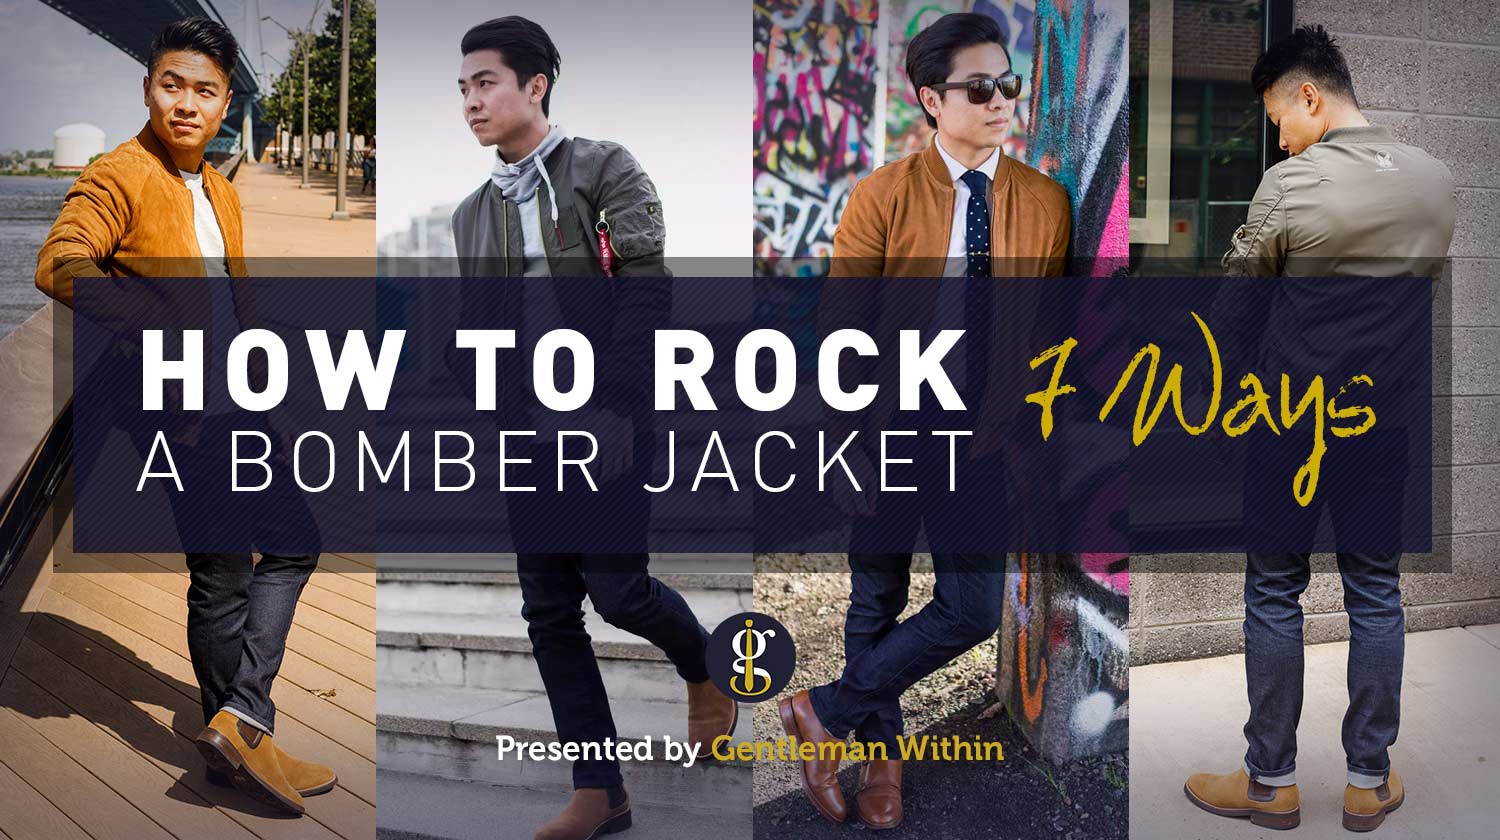 How To Wear A Bomber Jacket Outfits | GENTLEMAN WITHIN